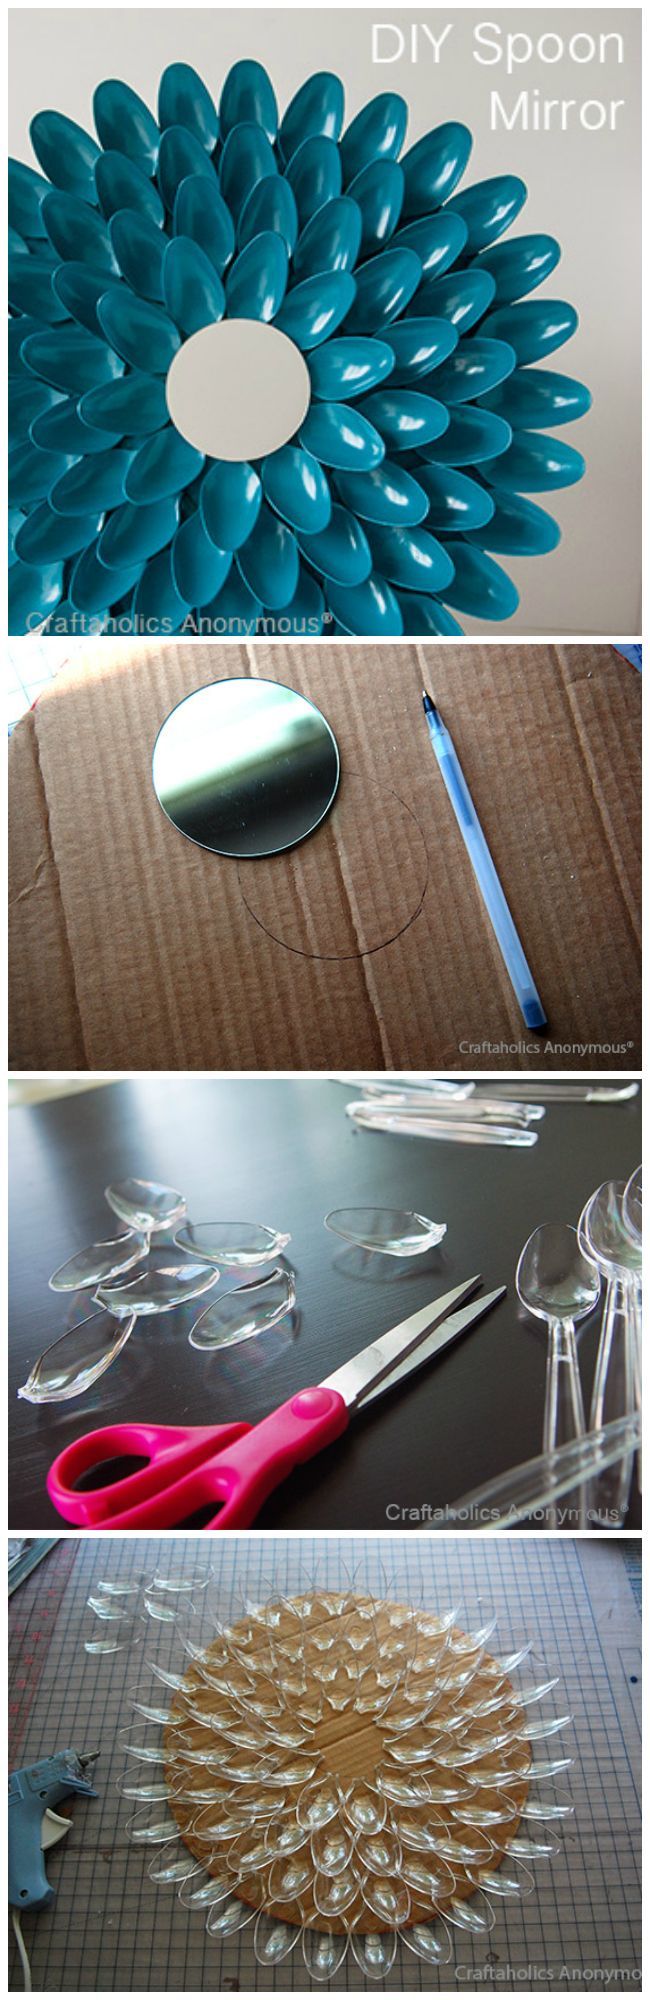 DIY Spoon Mirror Tutorial. Costs only $3 to make. Fun, easy craft!